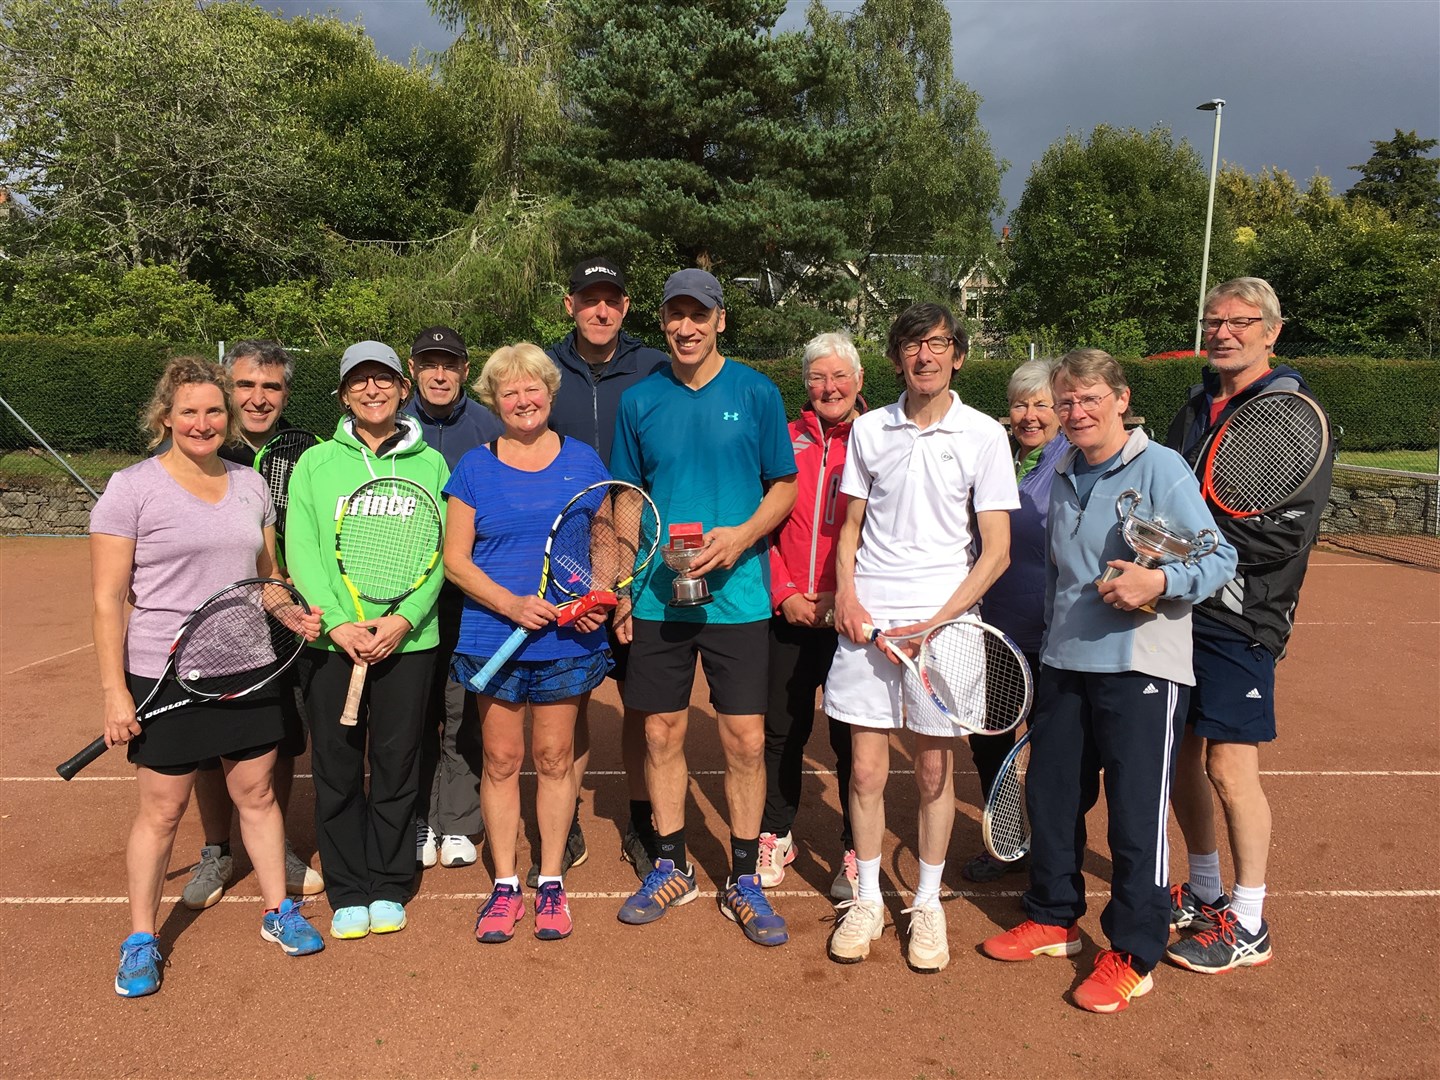 There was a great turnout for the climax of Kingussie Tennis Club's season.